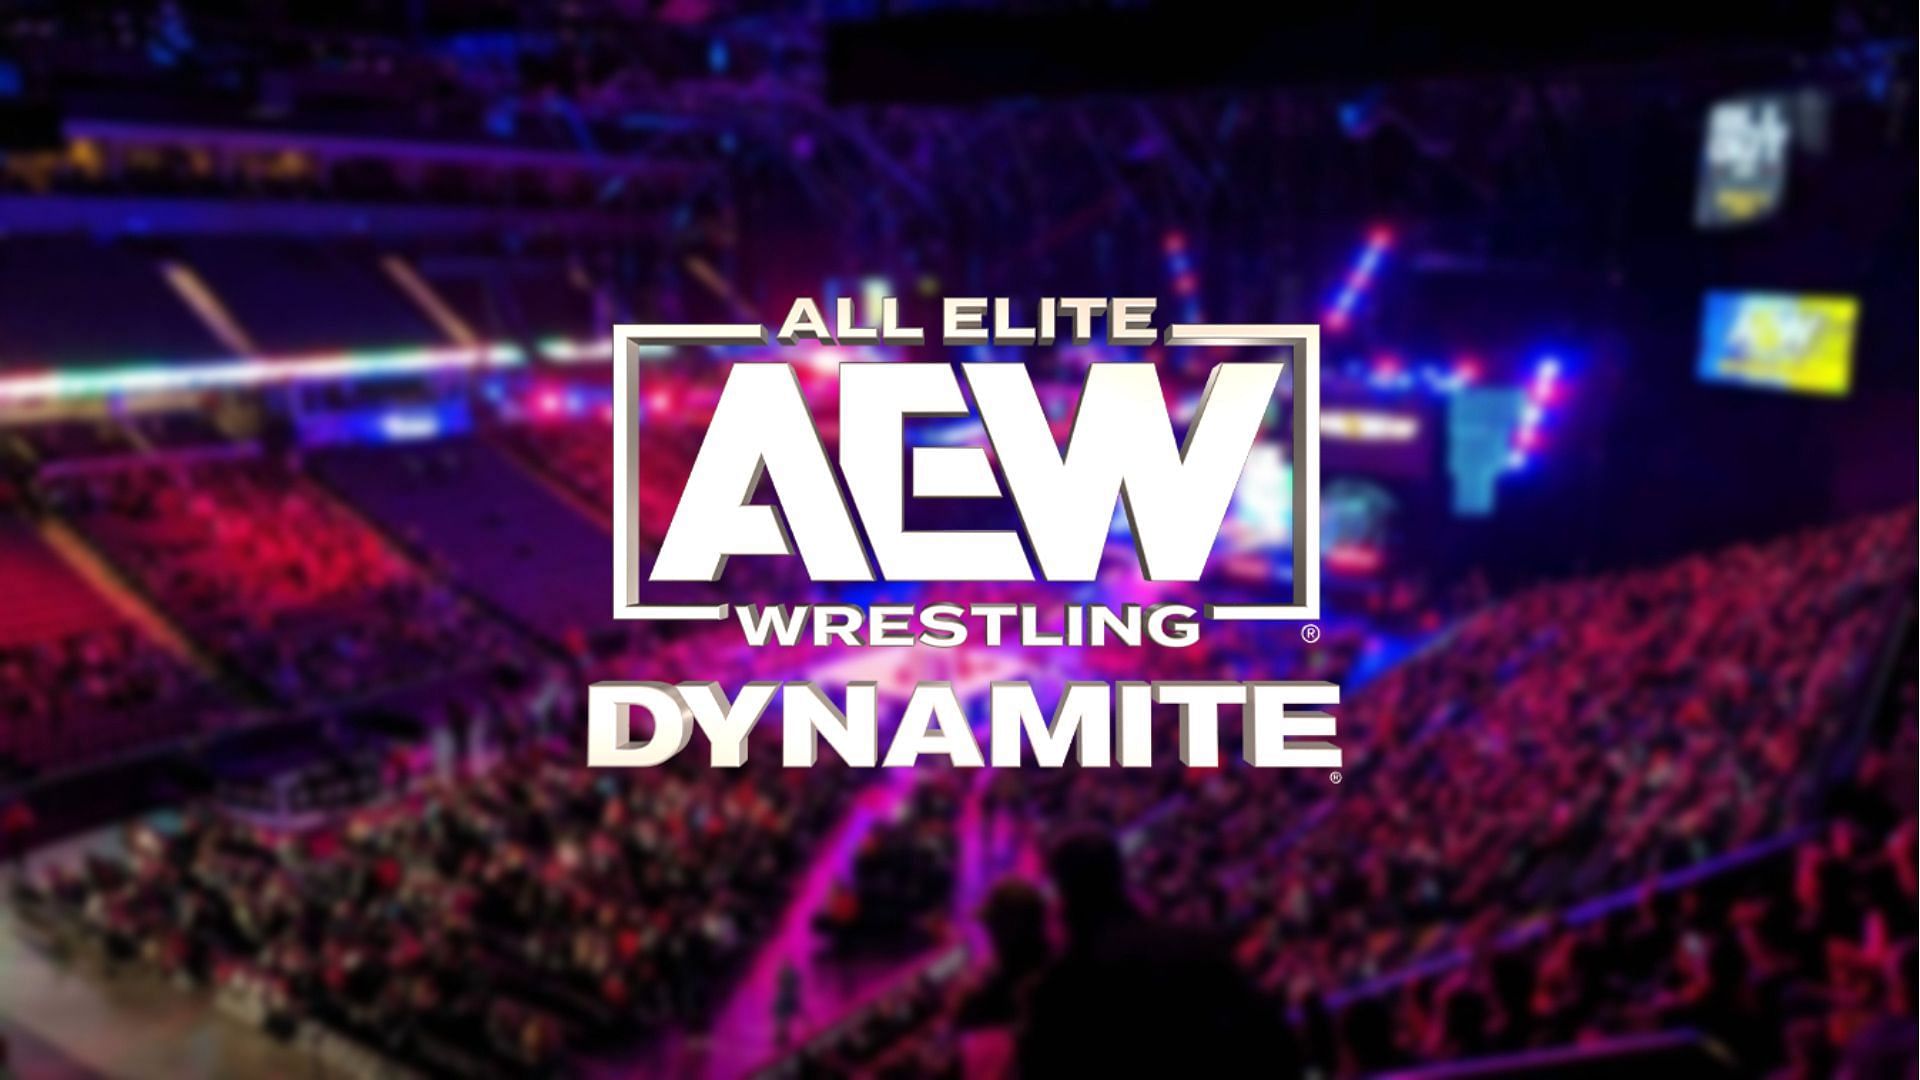 Find out which massive match is set to take place on AEW Dynamite?